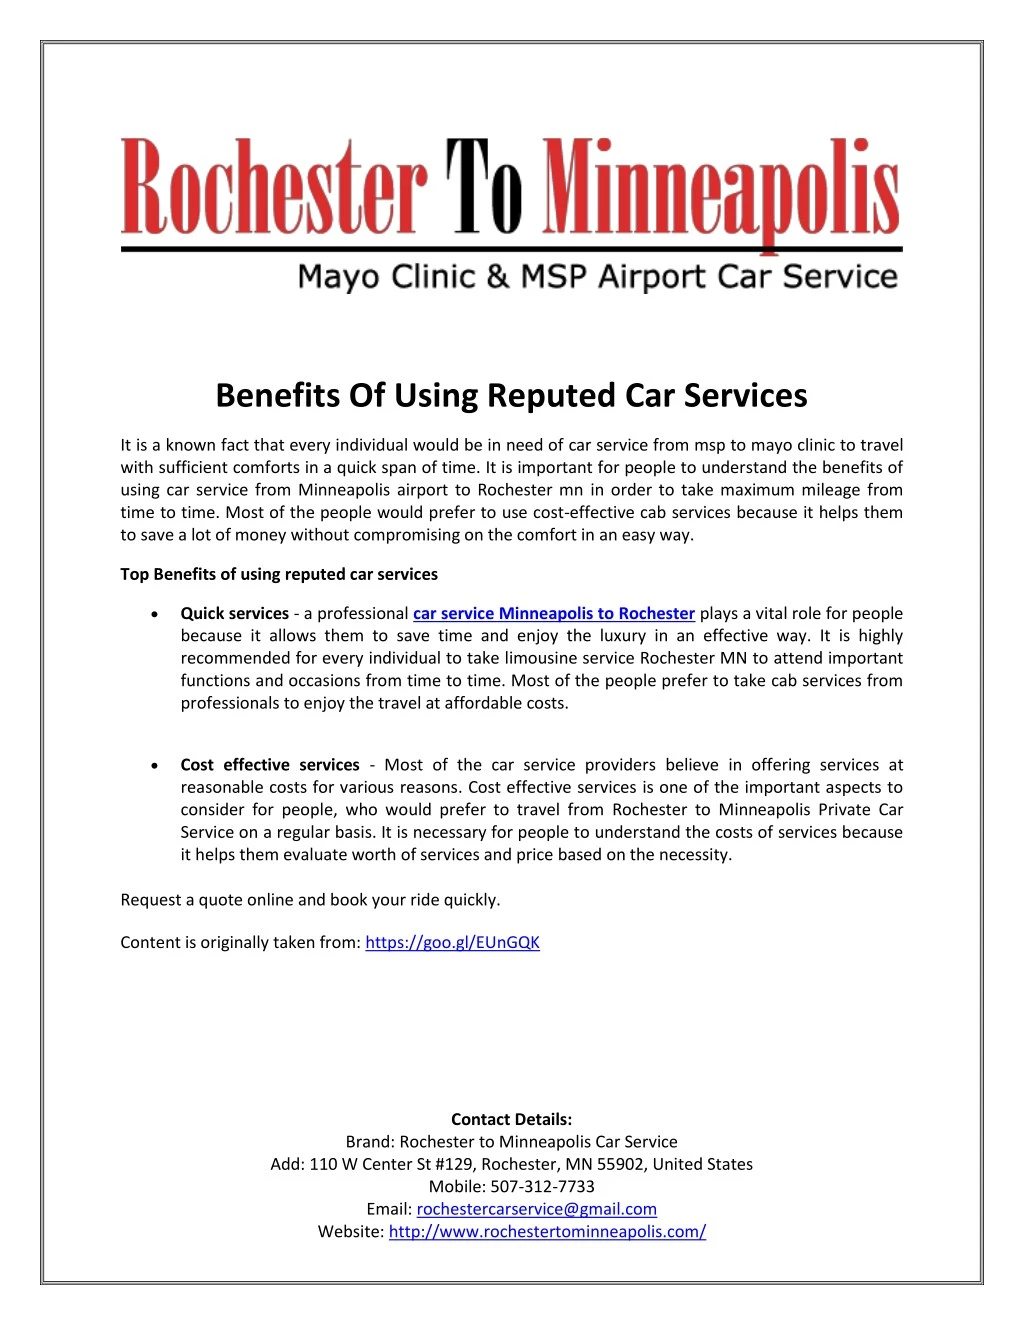 benefits of using reputed car services